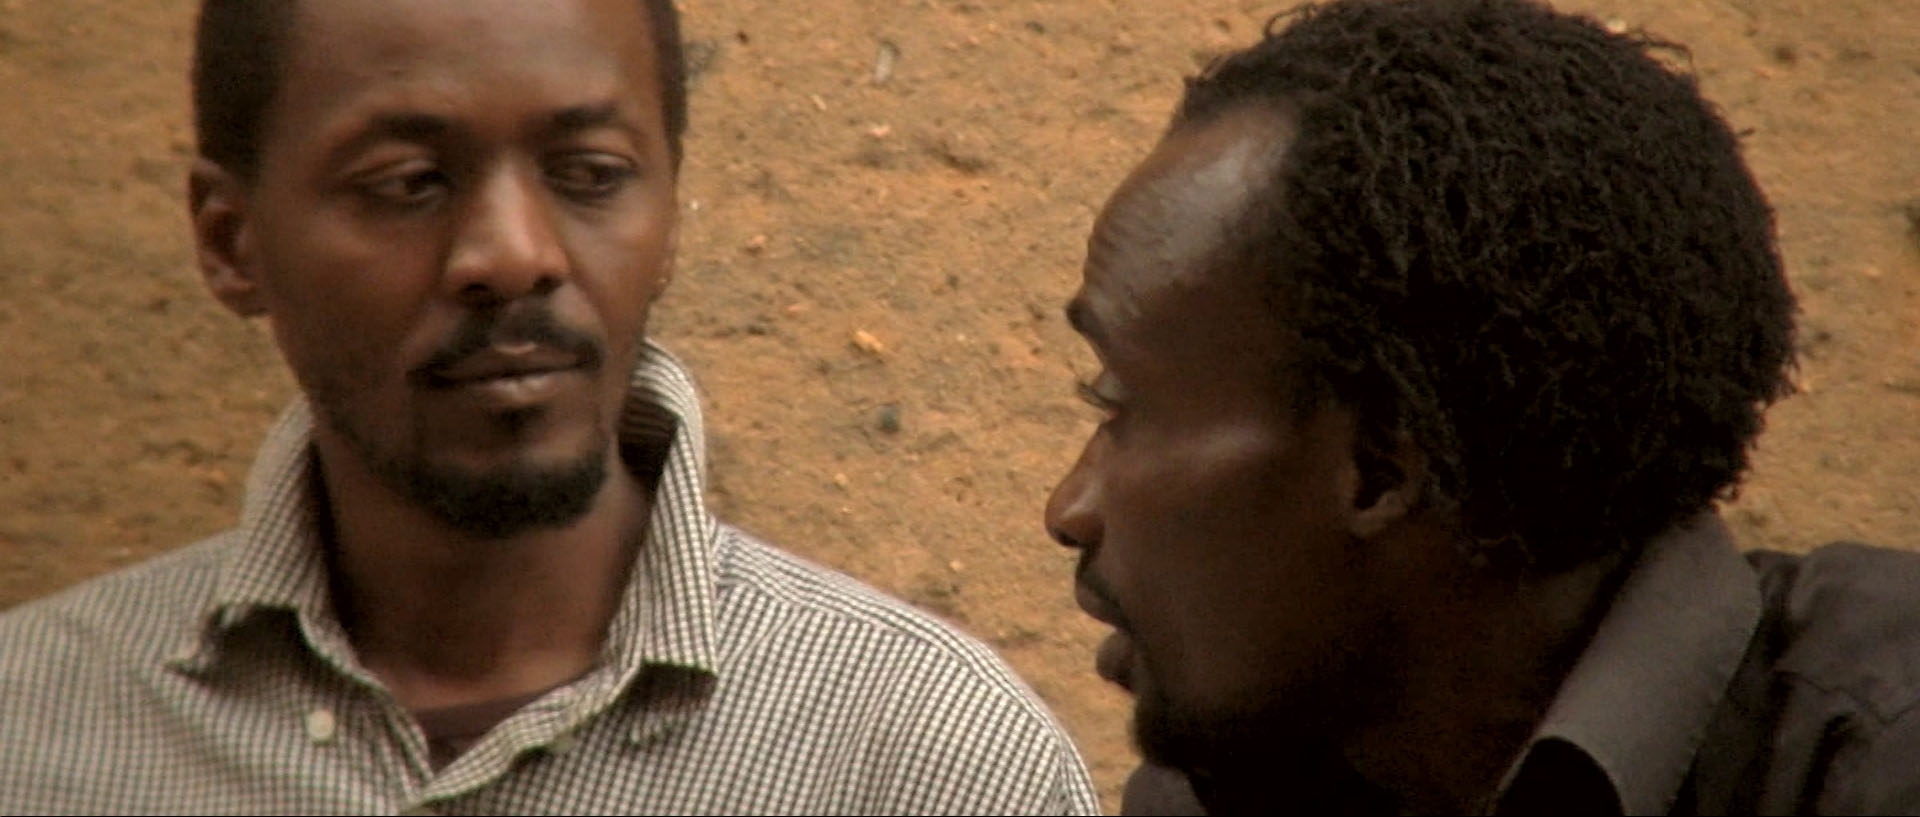 Lead actor James Bagyenzi on left with supporting actor <b>Henry Opio</b> on right. - 03.Still050